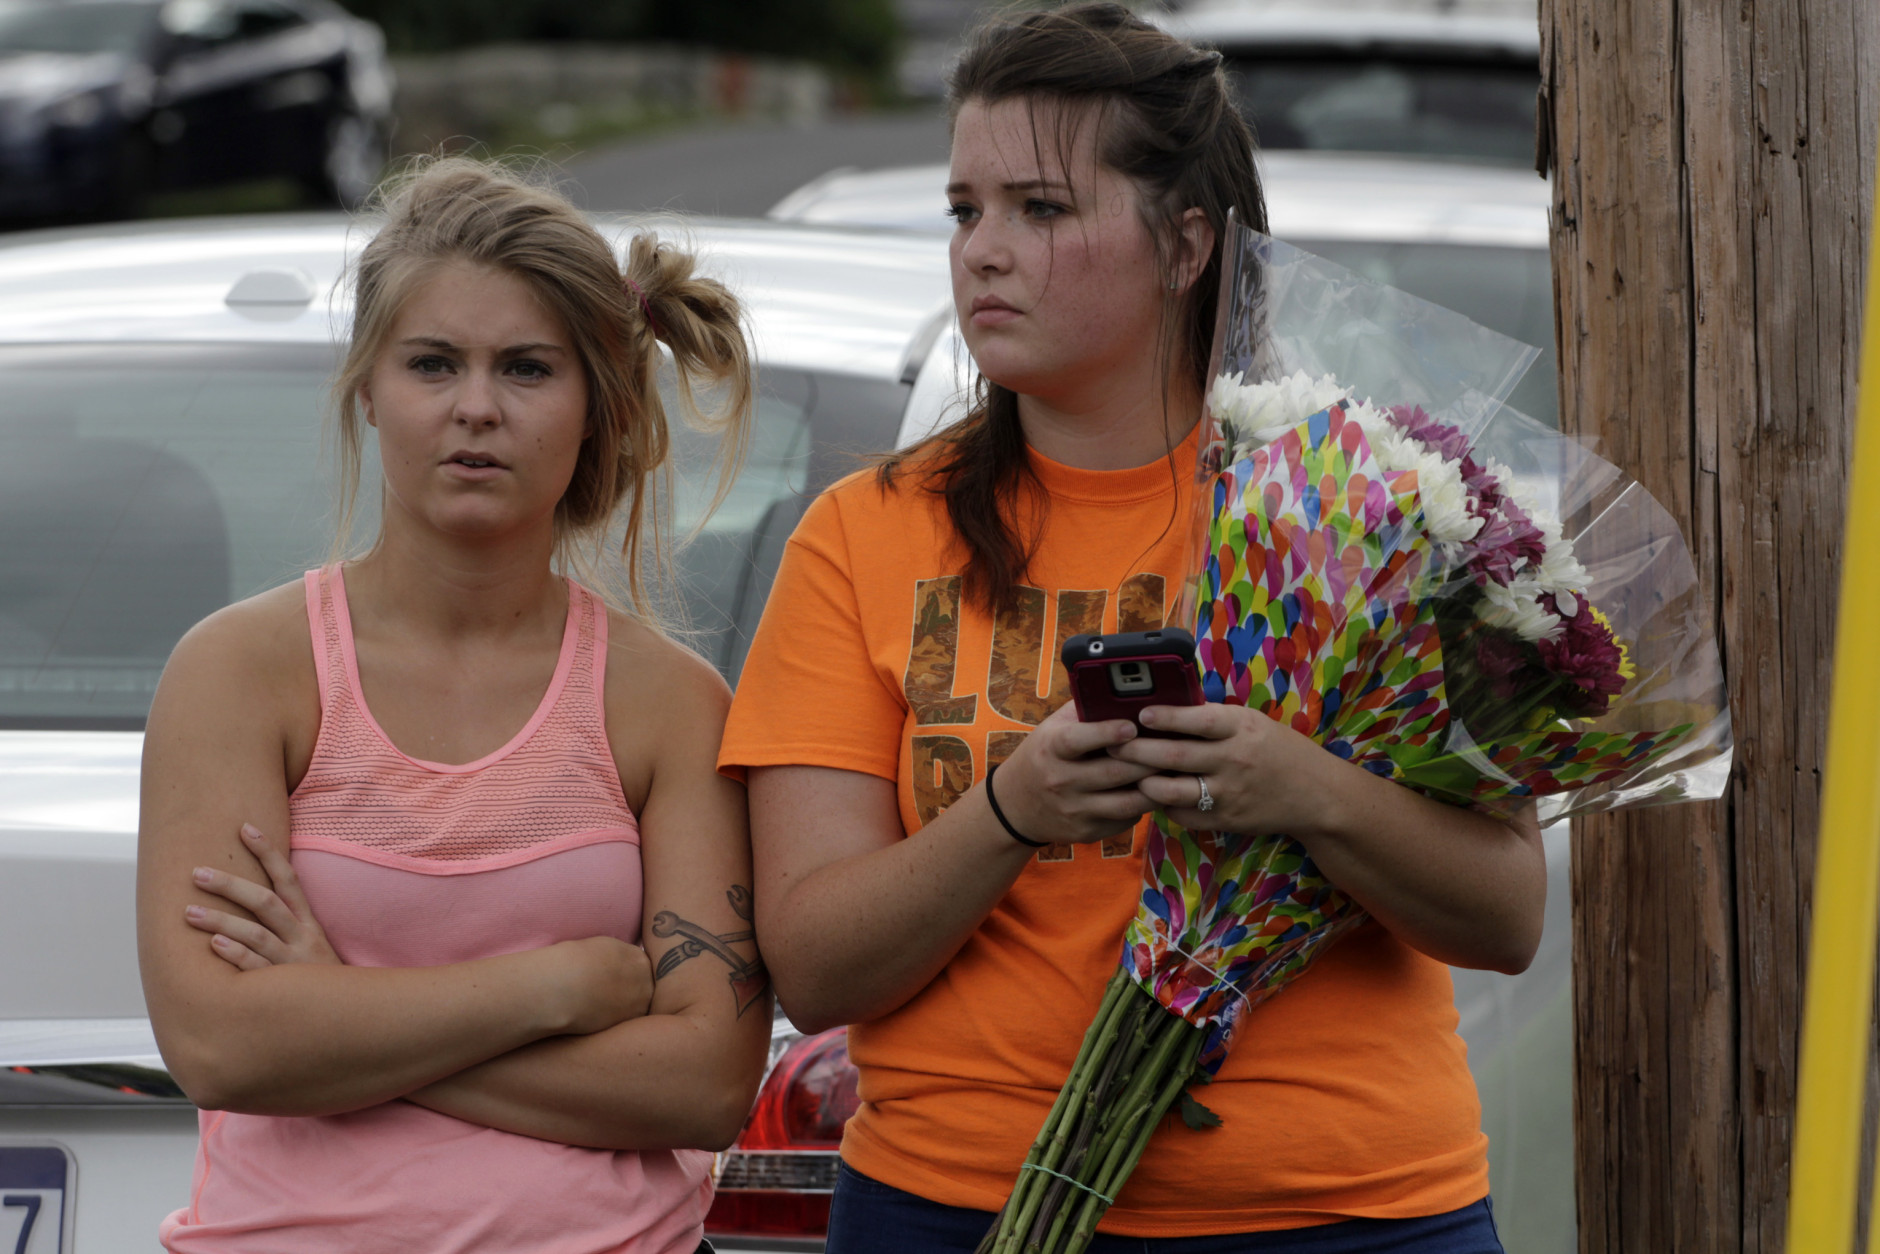 ROANOKE, VA - AUGUST 26: Madalyn Hartberger (L) and Rachel Ostrom bring flowers for the two journalists that were killed this morning during a live broadcast on August 26, 2015 in Roanoke, Virginia. Two employees of WDBJ TV were killed this morning during a live broadcast at Bridgewater Plaza on Smith Mountain Lake. The victims have been identified as reporter Alison Parker and cameraman Adam Ward. Parker, 24 and Ward, 27, worked for WDBJ in Roanoke, Virginia. The suspect, Vester Lee Flanigan, also known as Bryce Williams, died of a self-inflicted gunshot wound. (Photo by Jay Paul/Getty Images)